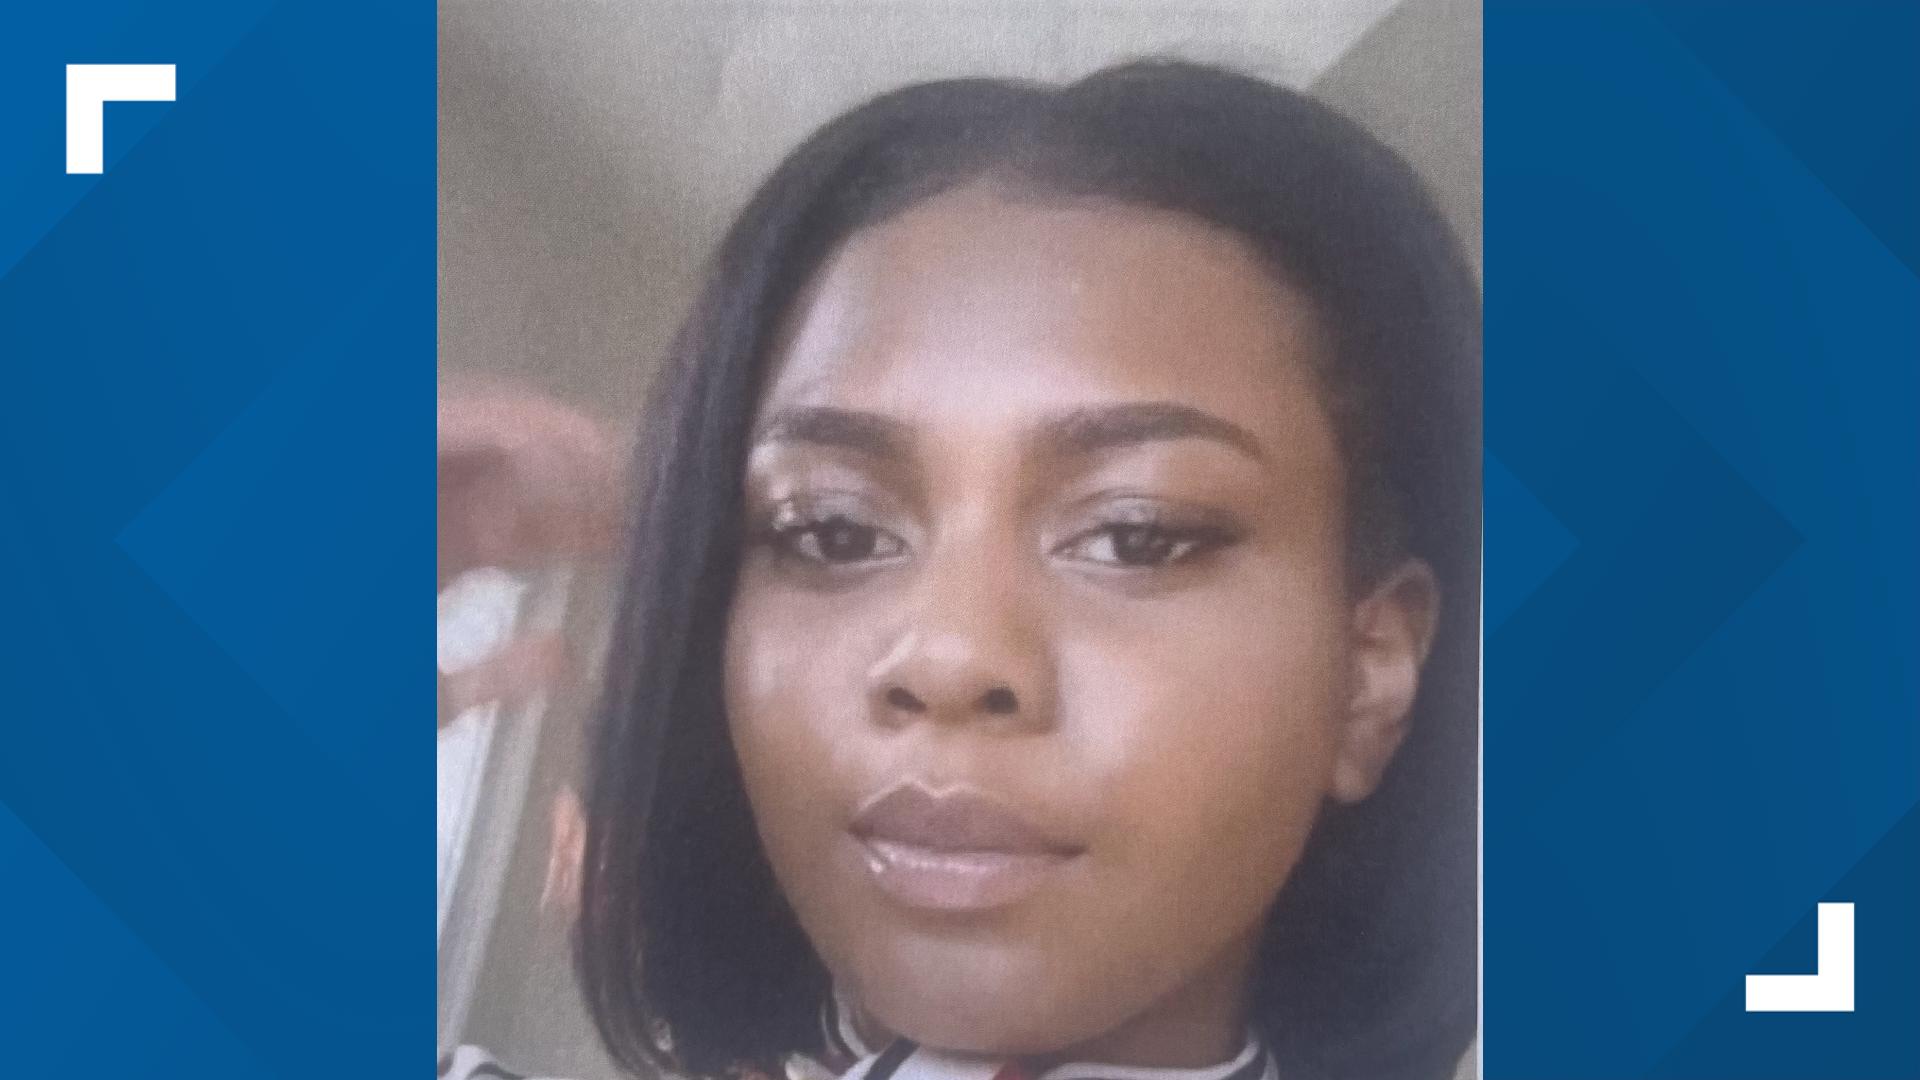 Loved ones reported Winston missing on April 1 after learning her apartment was cleared out allegedly by Michale Edwards, the father of her child and boyfriend.